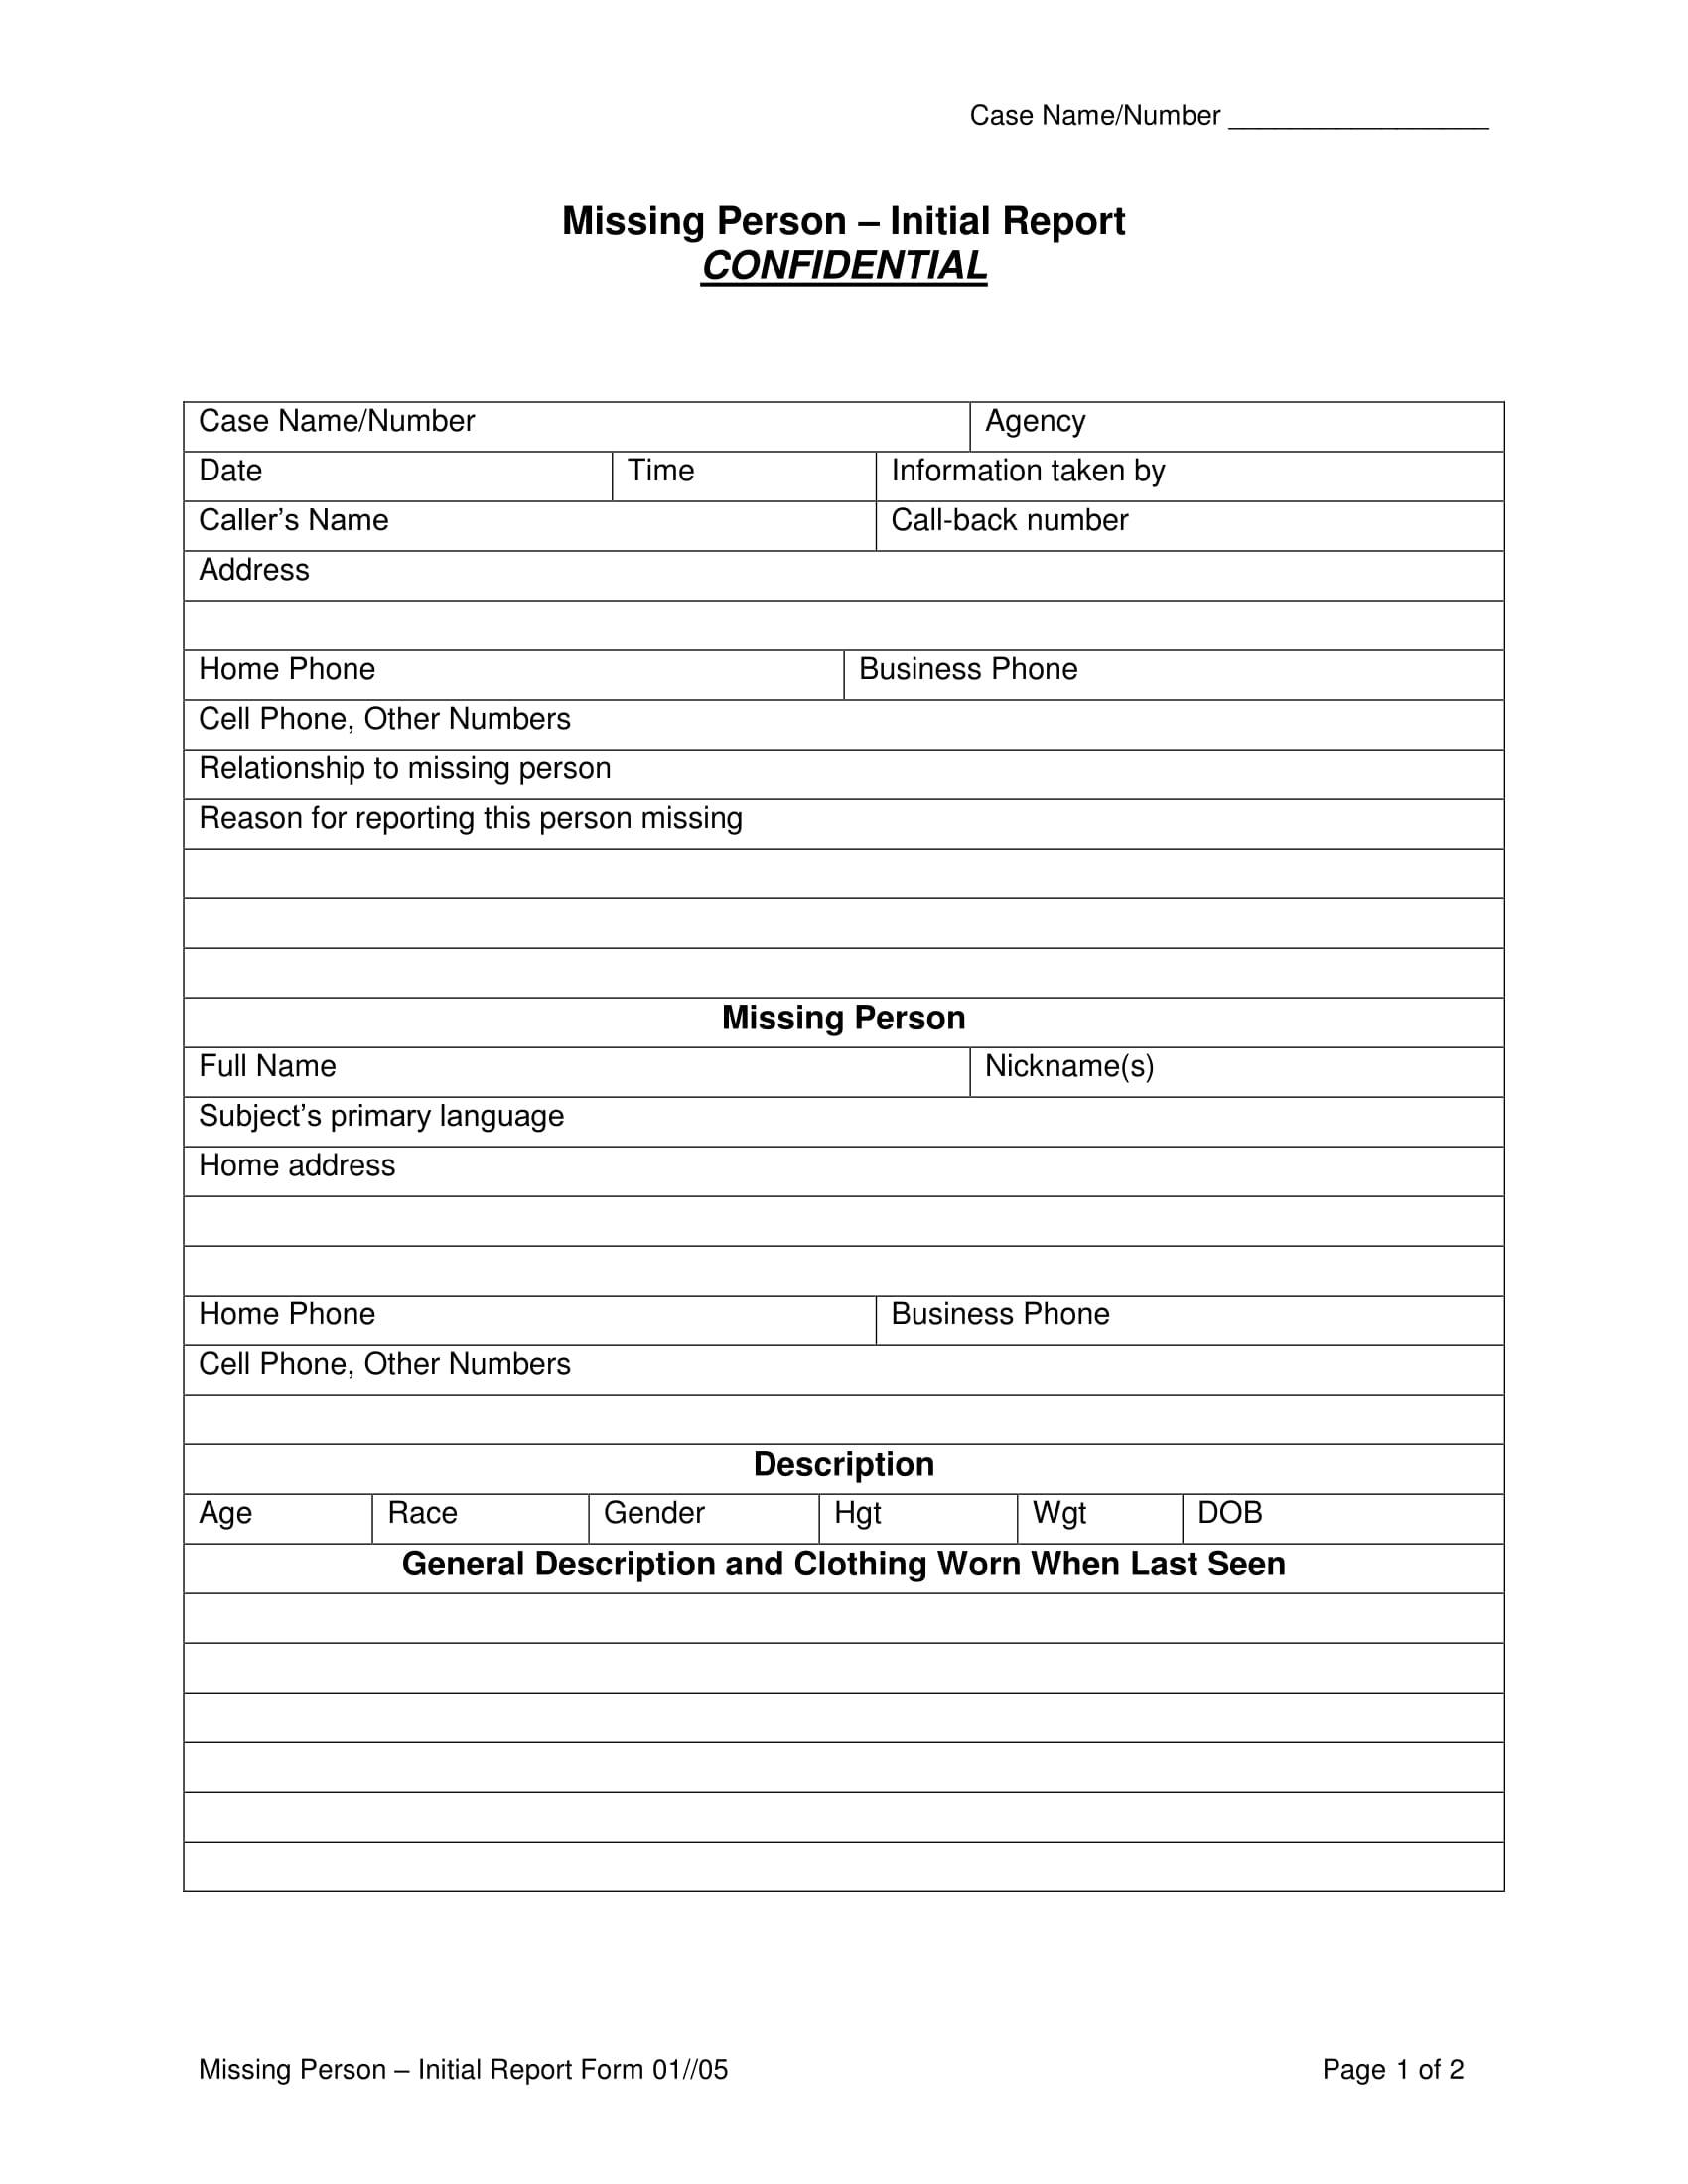 missing person report form 1